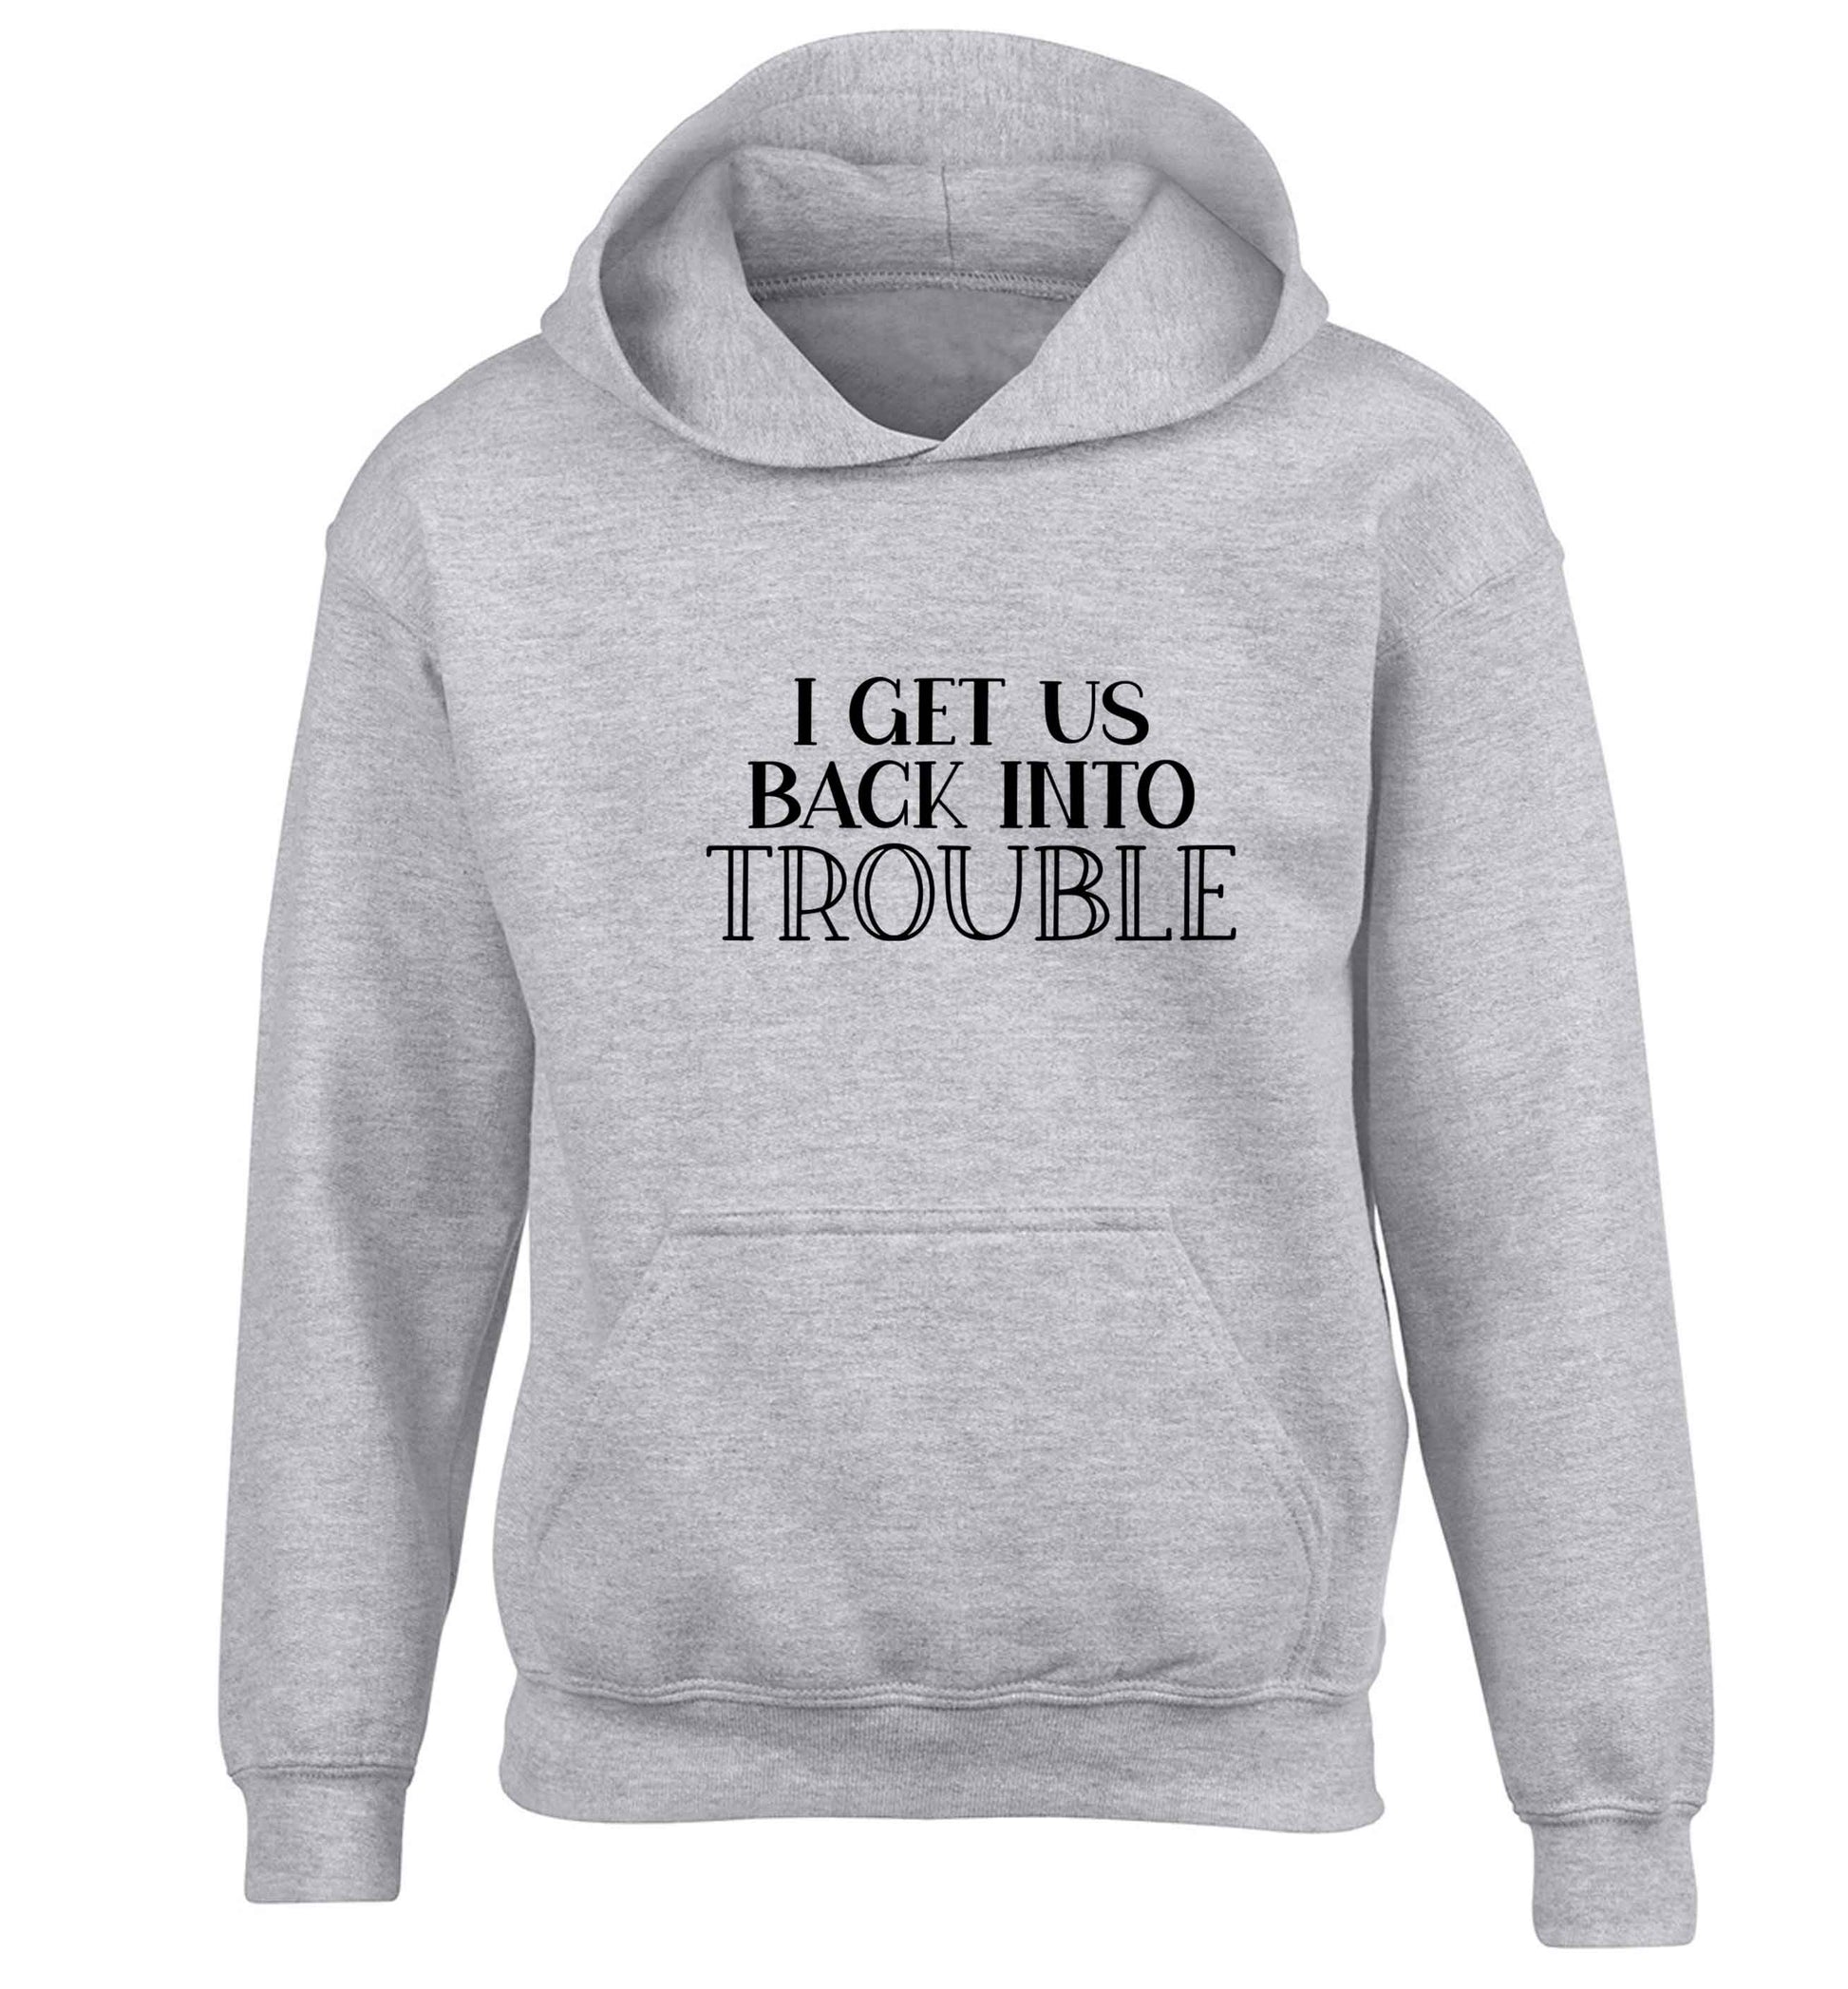 I get us back into trouble children's grey hoodie 12-13 Years